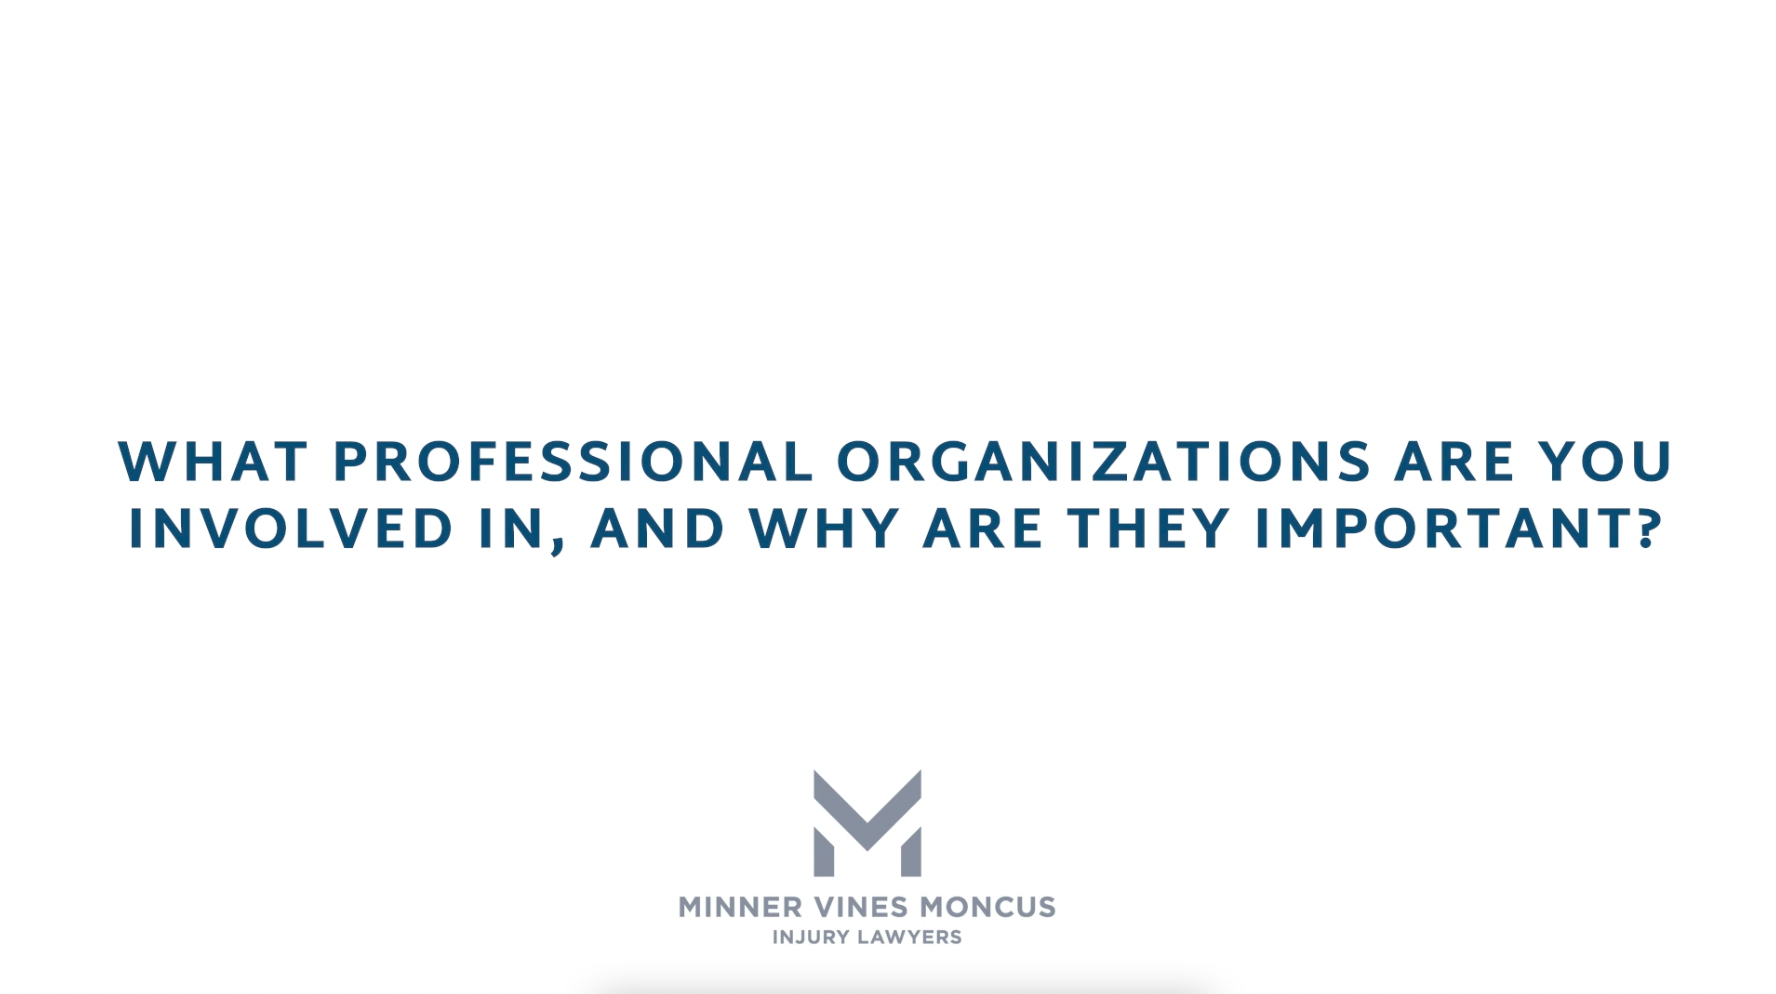 What professional organizations are you involved in, and why are they important?